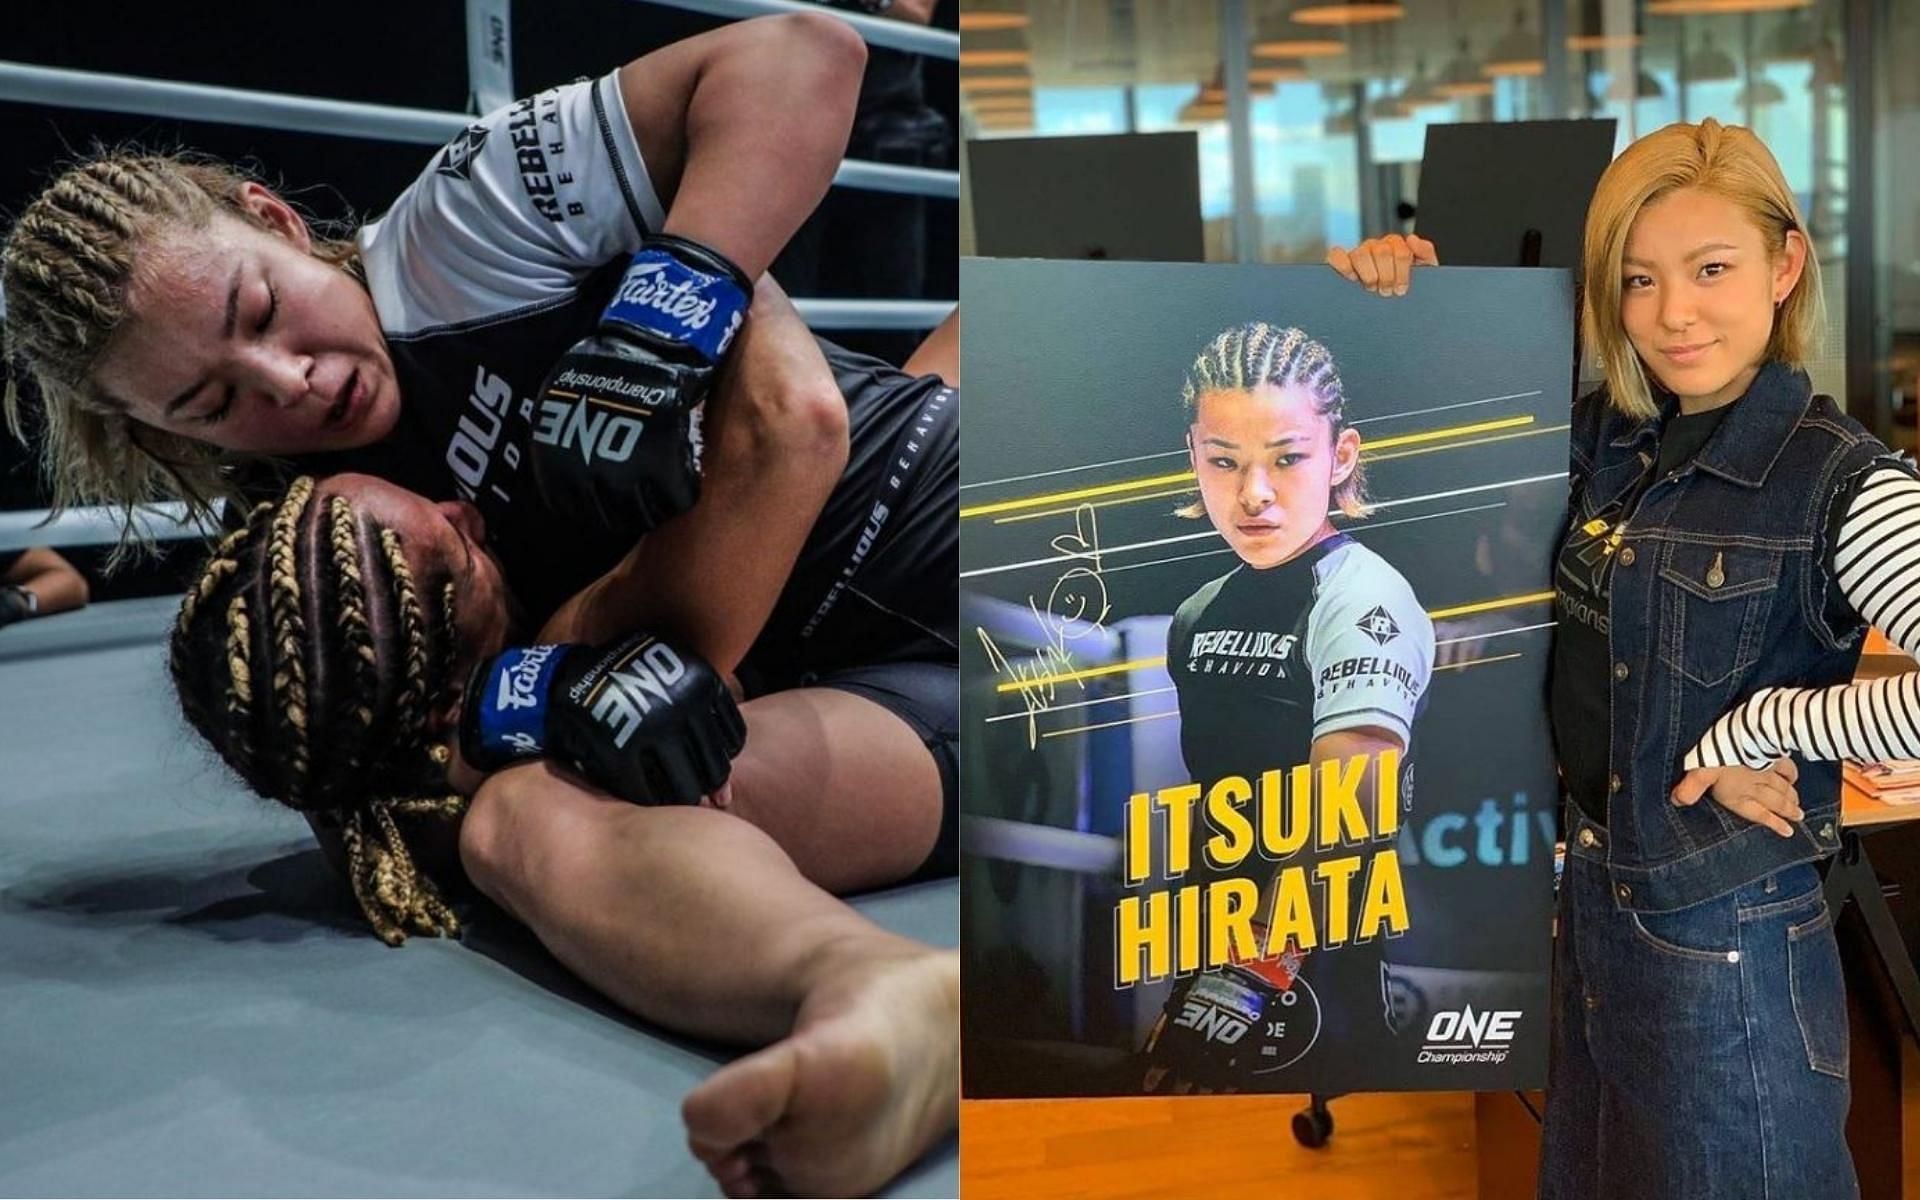 Itsuki Hirata has a unique nickname that&#039;s uncommon to fighters: Android 18. (Images courtesy: @_itsuki_h via Instagram)